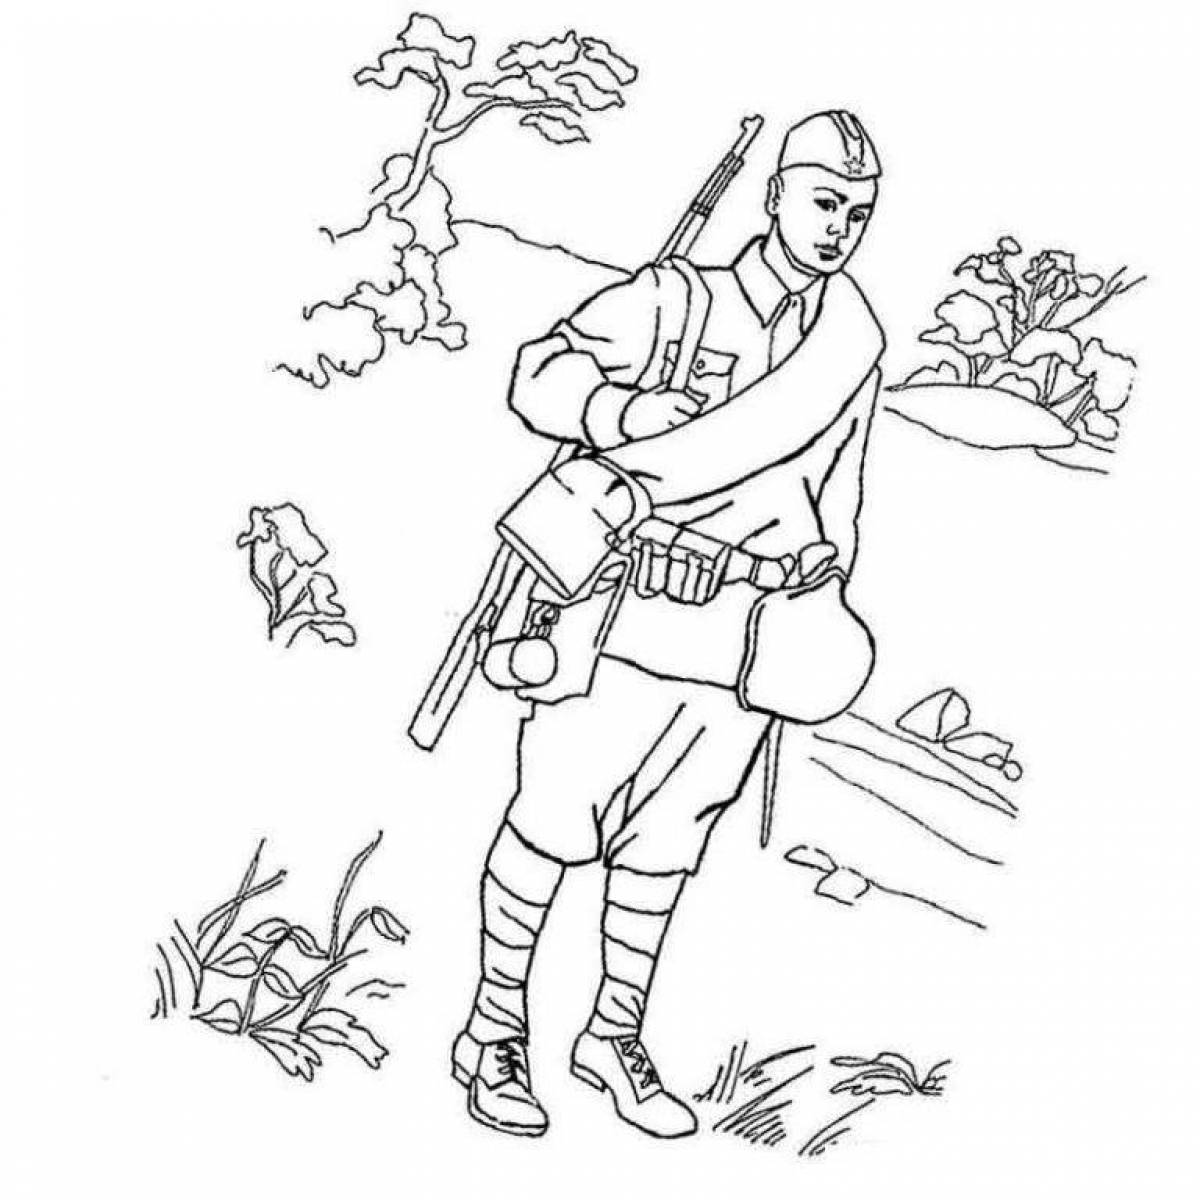 Colorful war coloring page